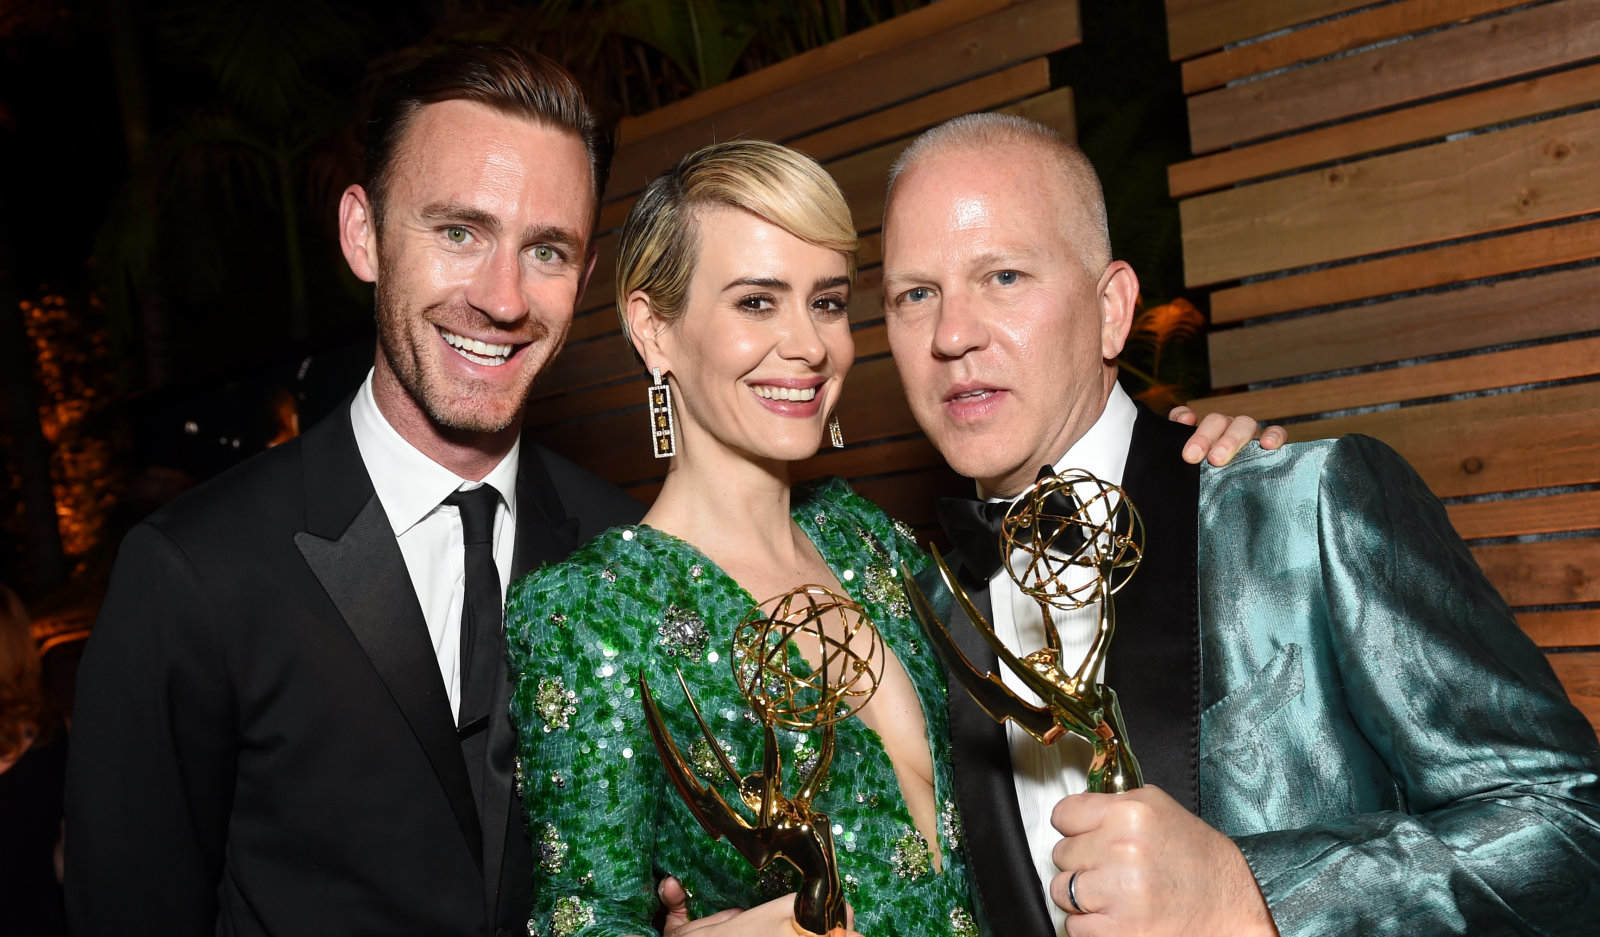 LOS ANGELES, CA - SEPTEMBER 18: Writer John Gray, actor Sarah Paulson and actor Ryan Murphy attends the FOX Broadcasting Company, FX, National Geographic And Twentieth Century Fox Television's 68th Primetime Emmy Awards after Party at Vibiana on September 18, 2016 in Los Angeles, California. (Photo by Emma McIntyre/Getty Images)